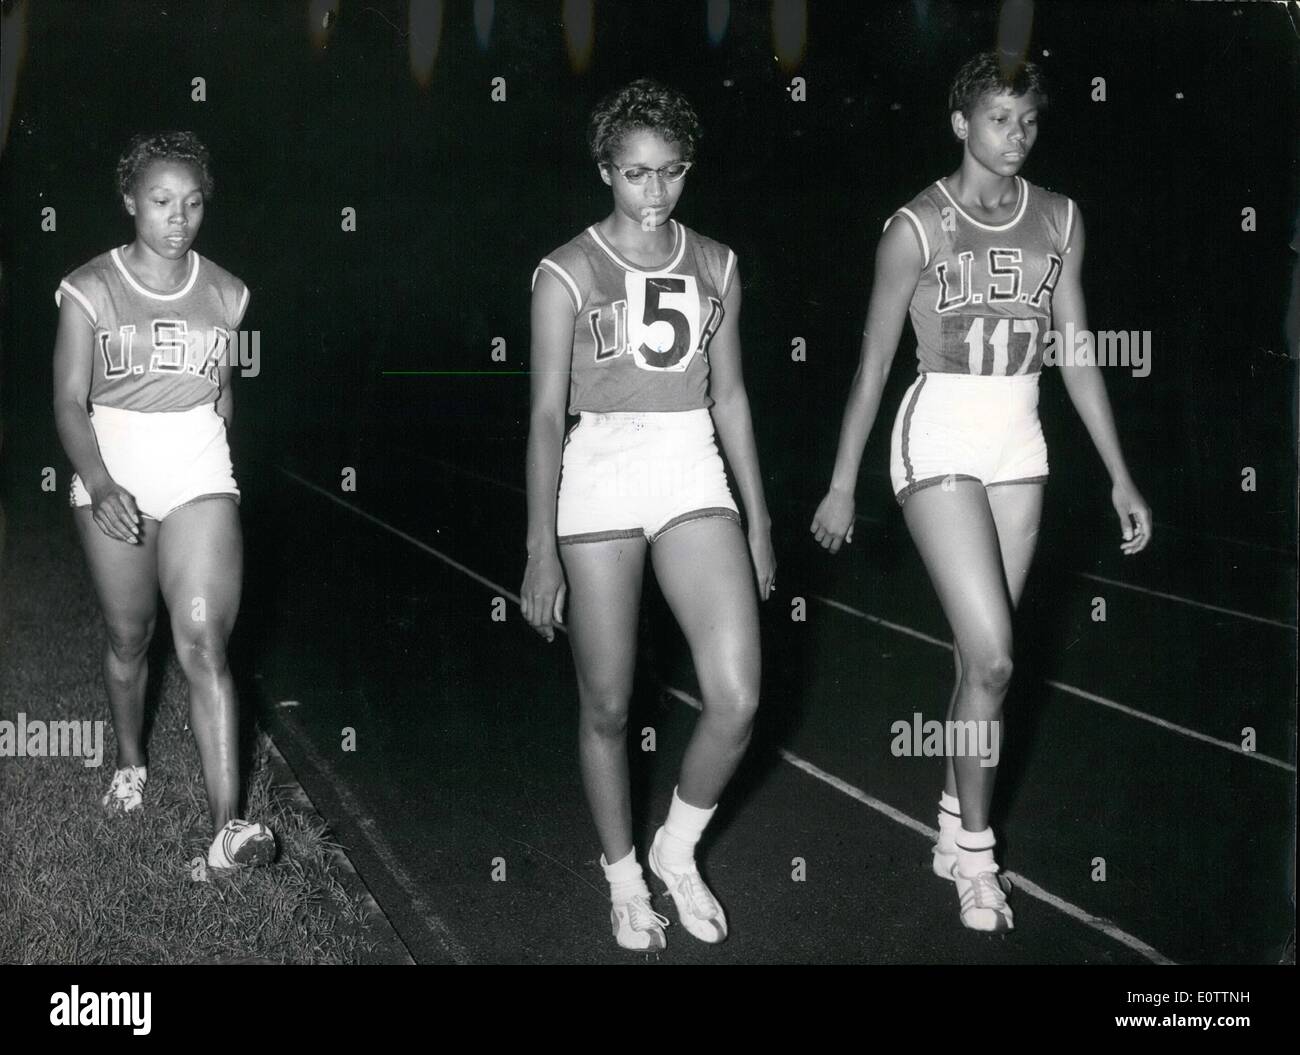 Sep. 09, 1960 - Quickest girl of the world, the american girl Wilma Rudolph in the evening in the Olympic Stade of Amsterdam. Wilma(117)after winning her 100 meter-sprint. At her side Barbara Jones(50)also american sprinter. Stock Photo